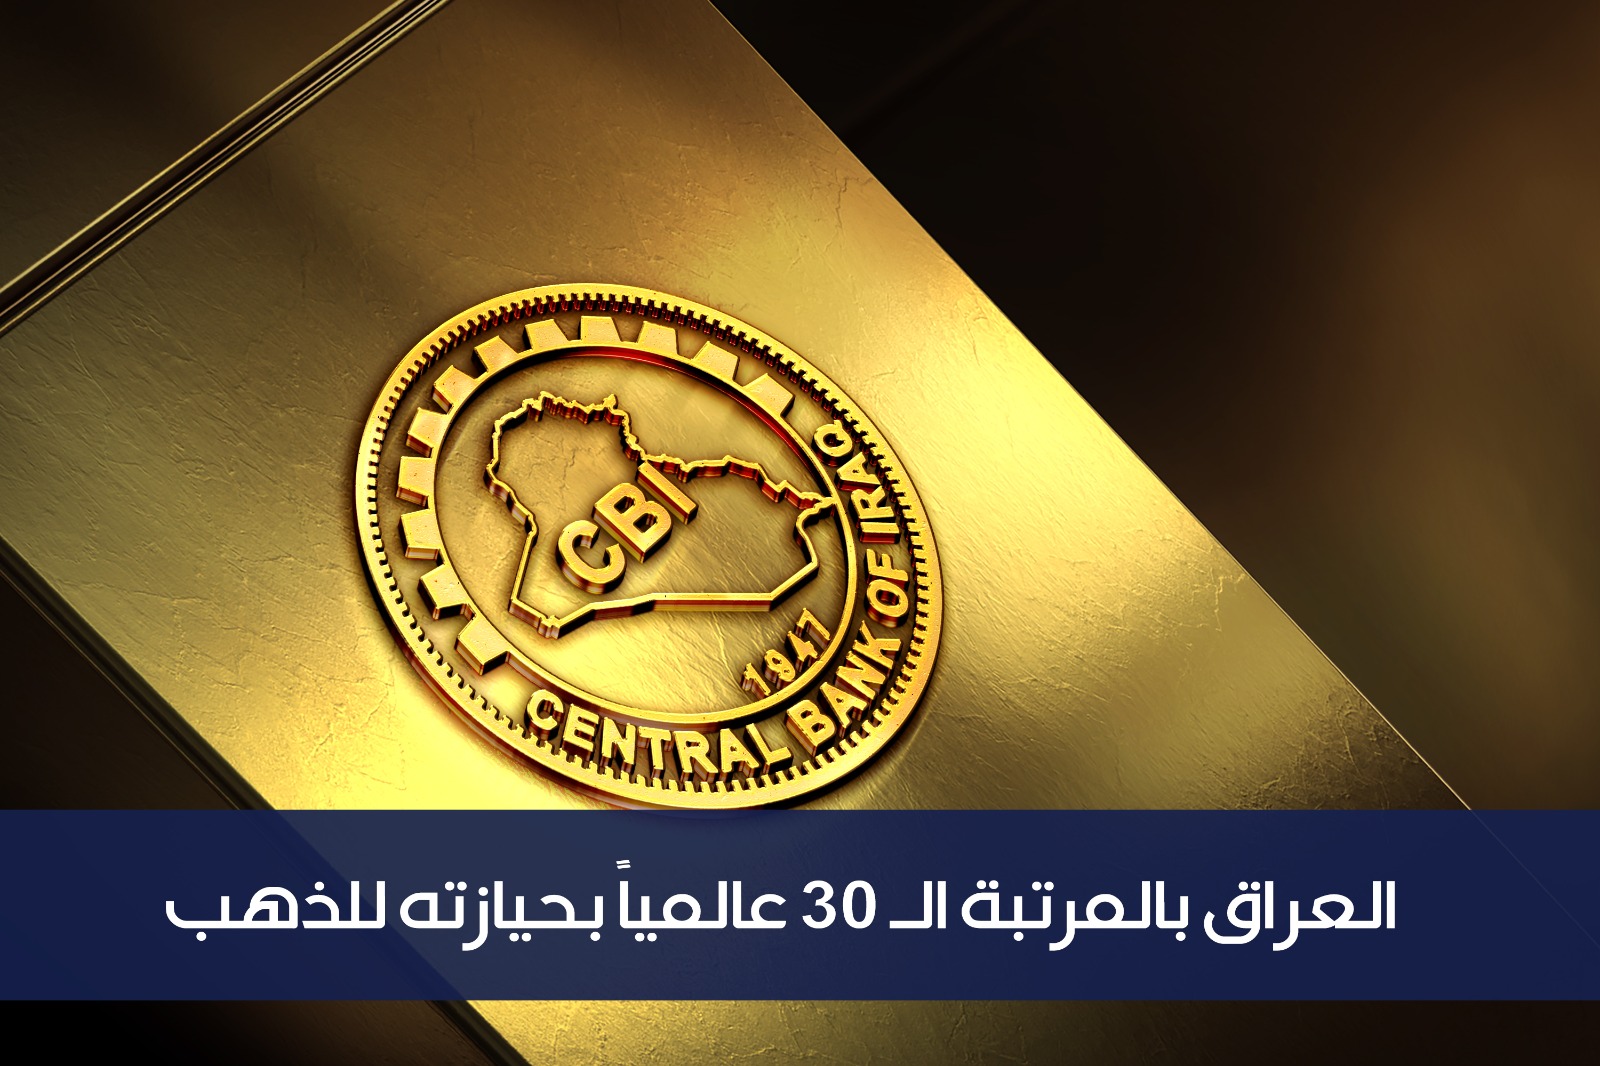 The Central Bank announces the purchase of gold of approximately 2.3 tons and maintains its rank globally